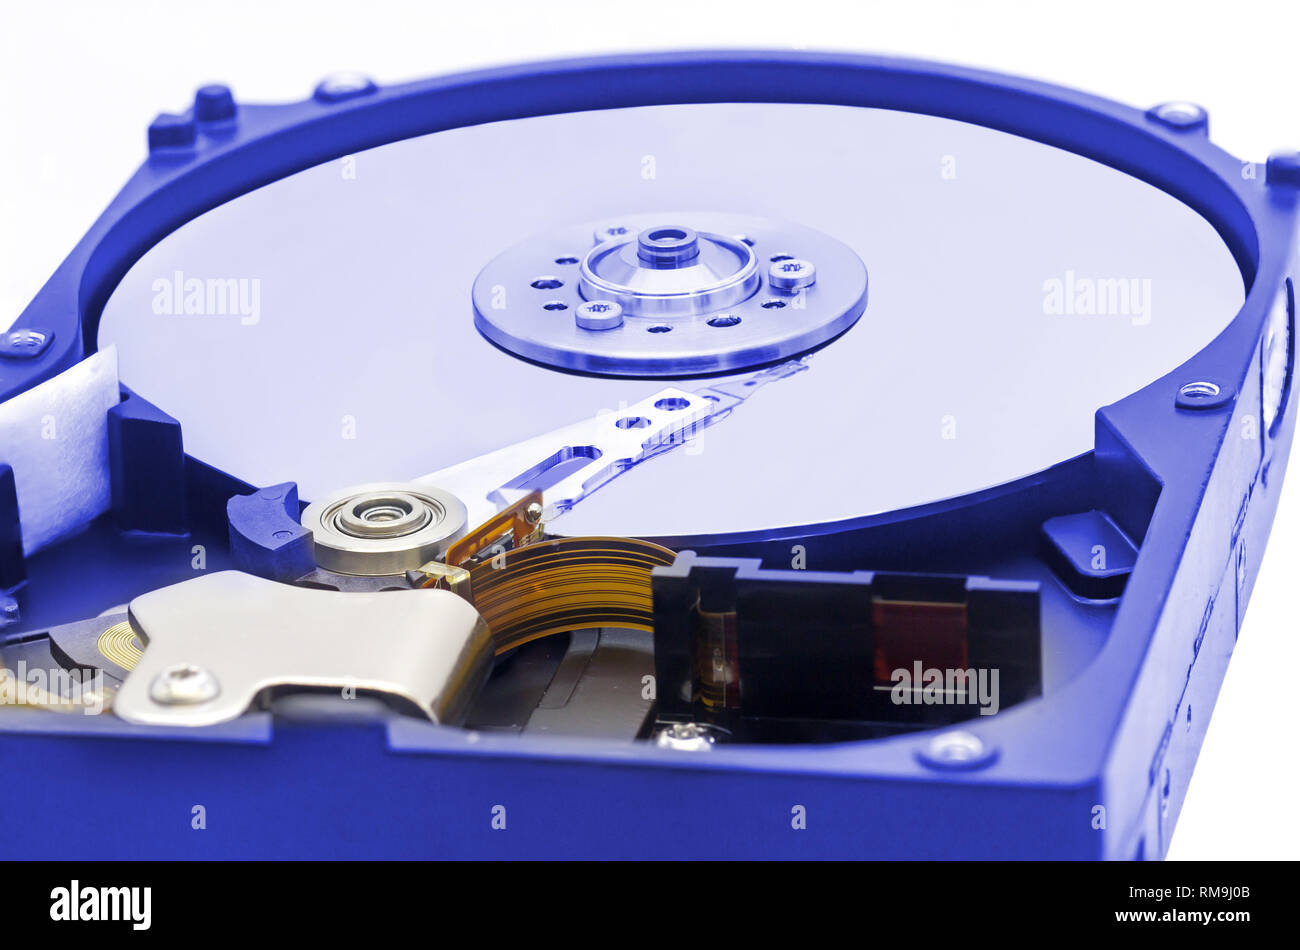 HDD Hard disk drive isolated on white background Stock Photo